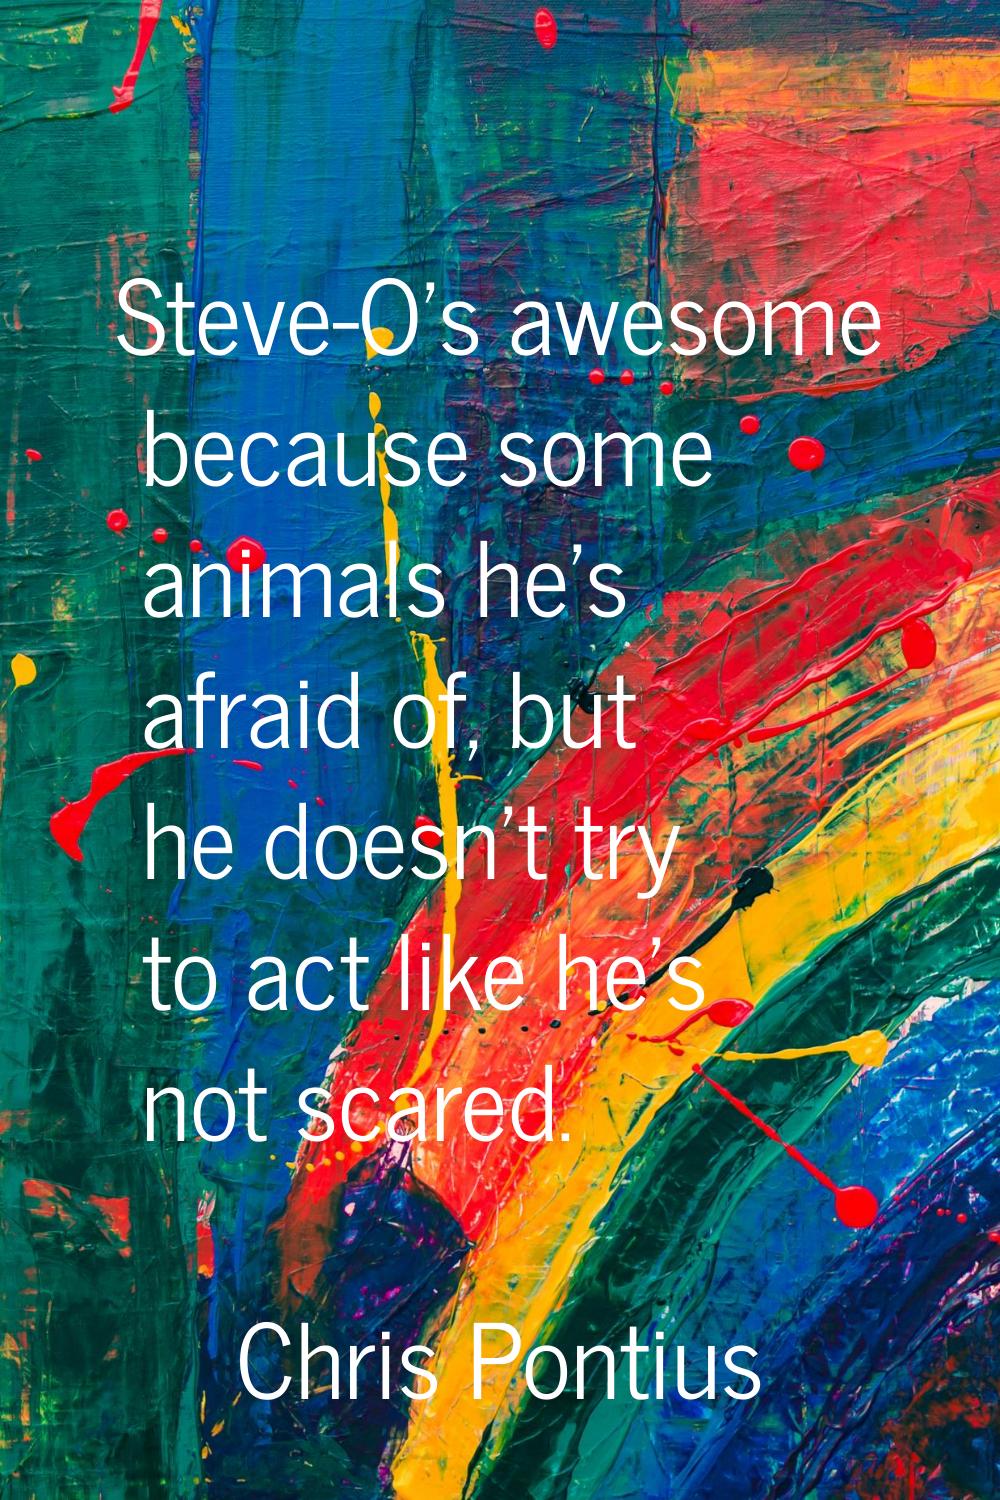 Steve-O's awesome because some animals he's afraid of, but he doesn't try to act like he's not scar